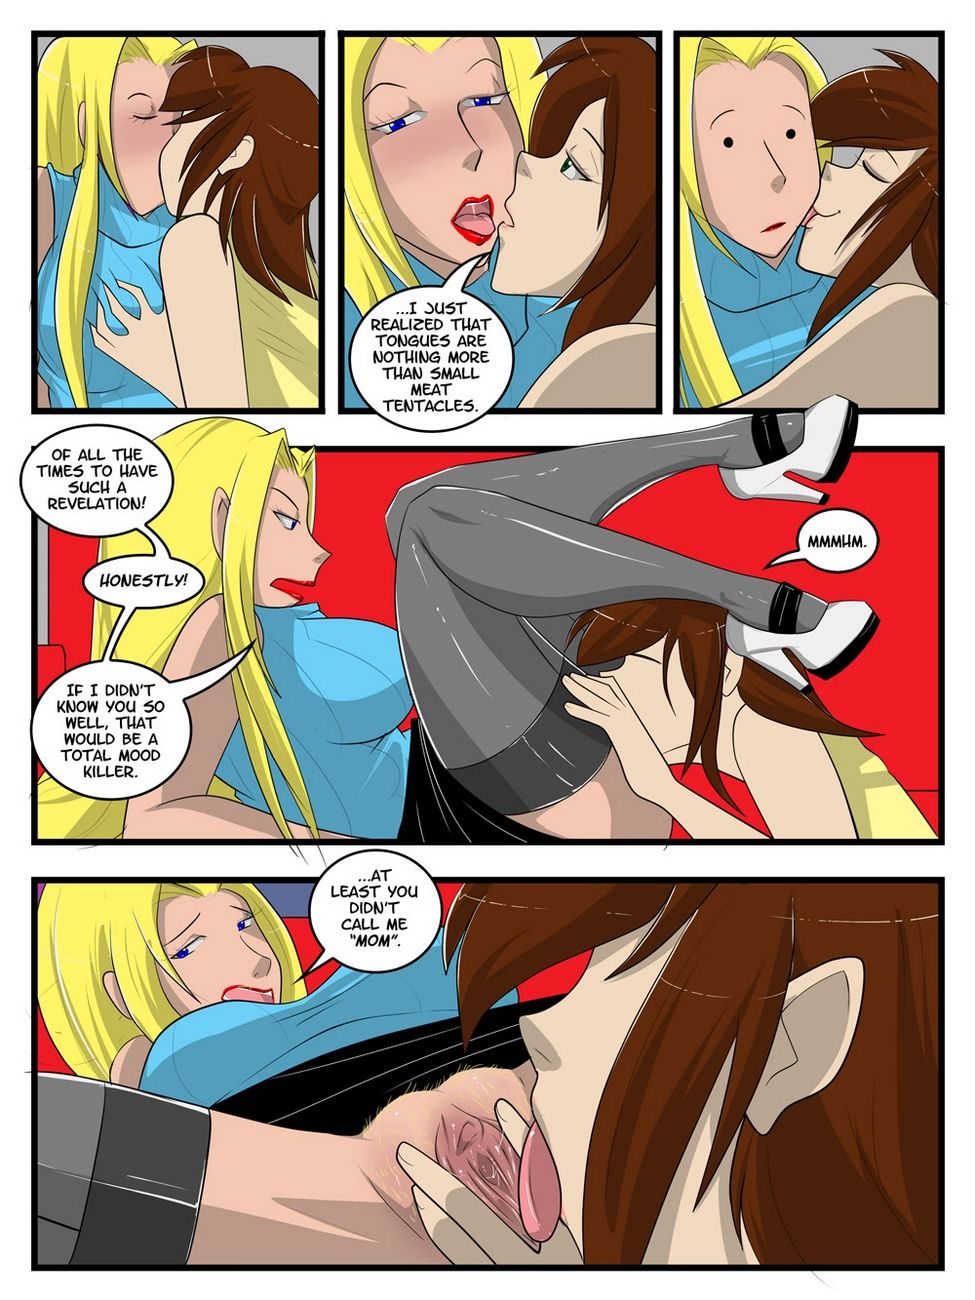 A Date With A Tentacle Monster 8 page 13